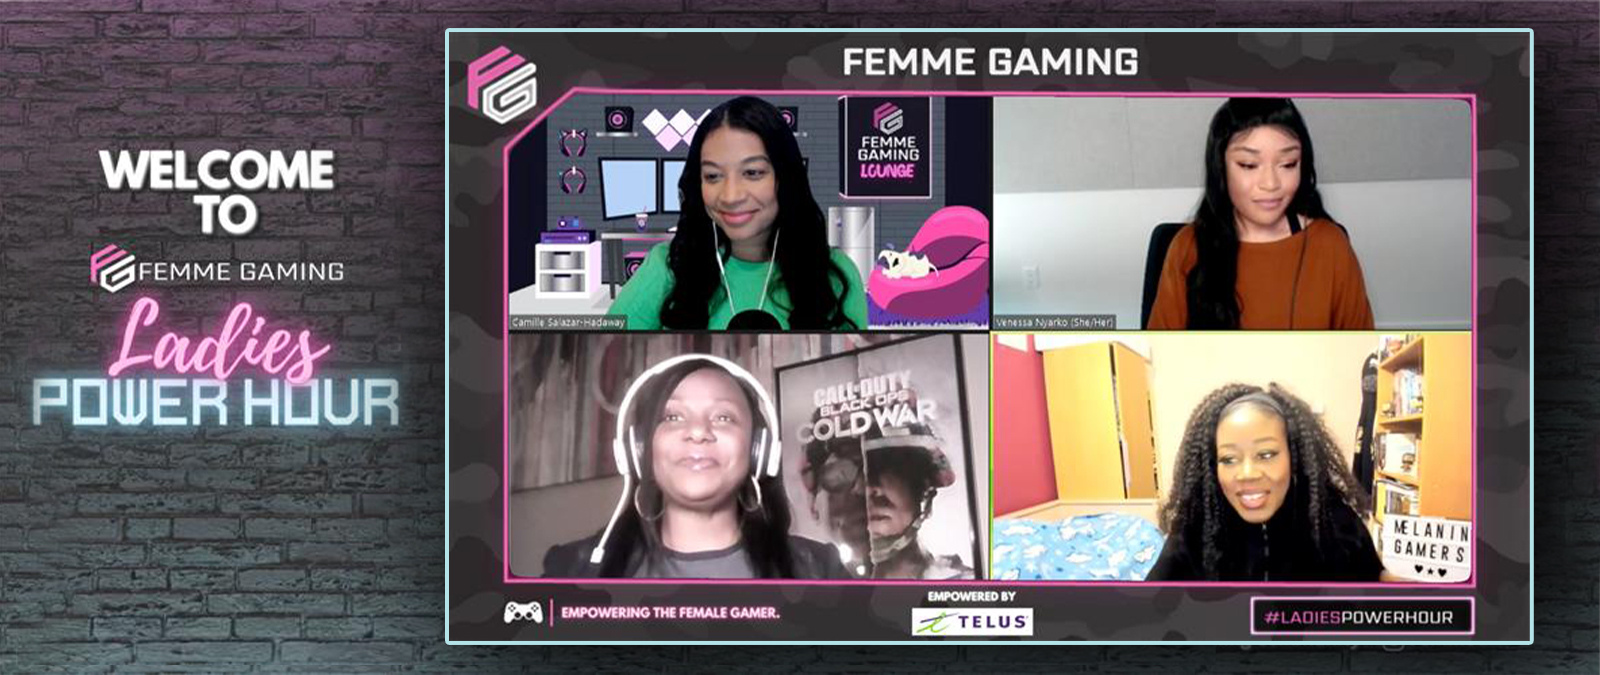 A preview of the Ladies Power Hour video, showing all 4 panelists alondside text, '
                                WELCOME TO FEMME GAMING LADIES POWER HOUR'